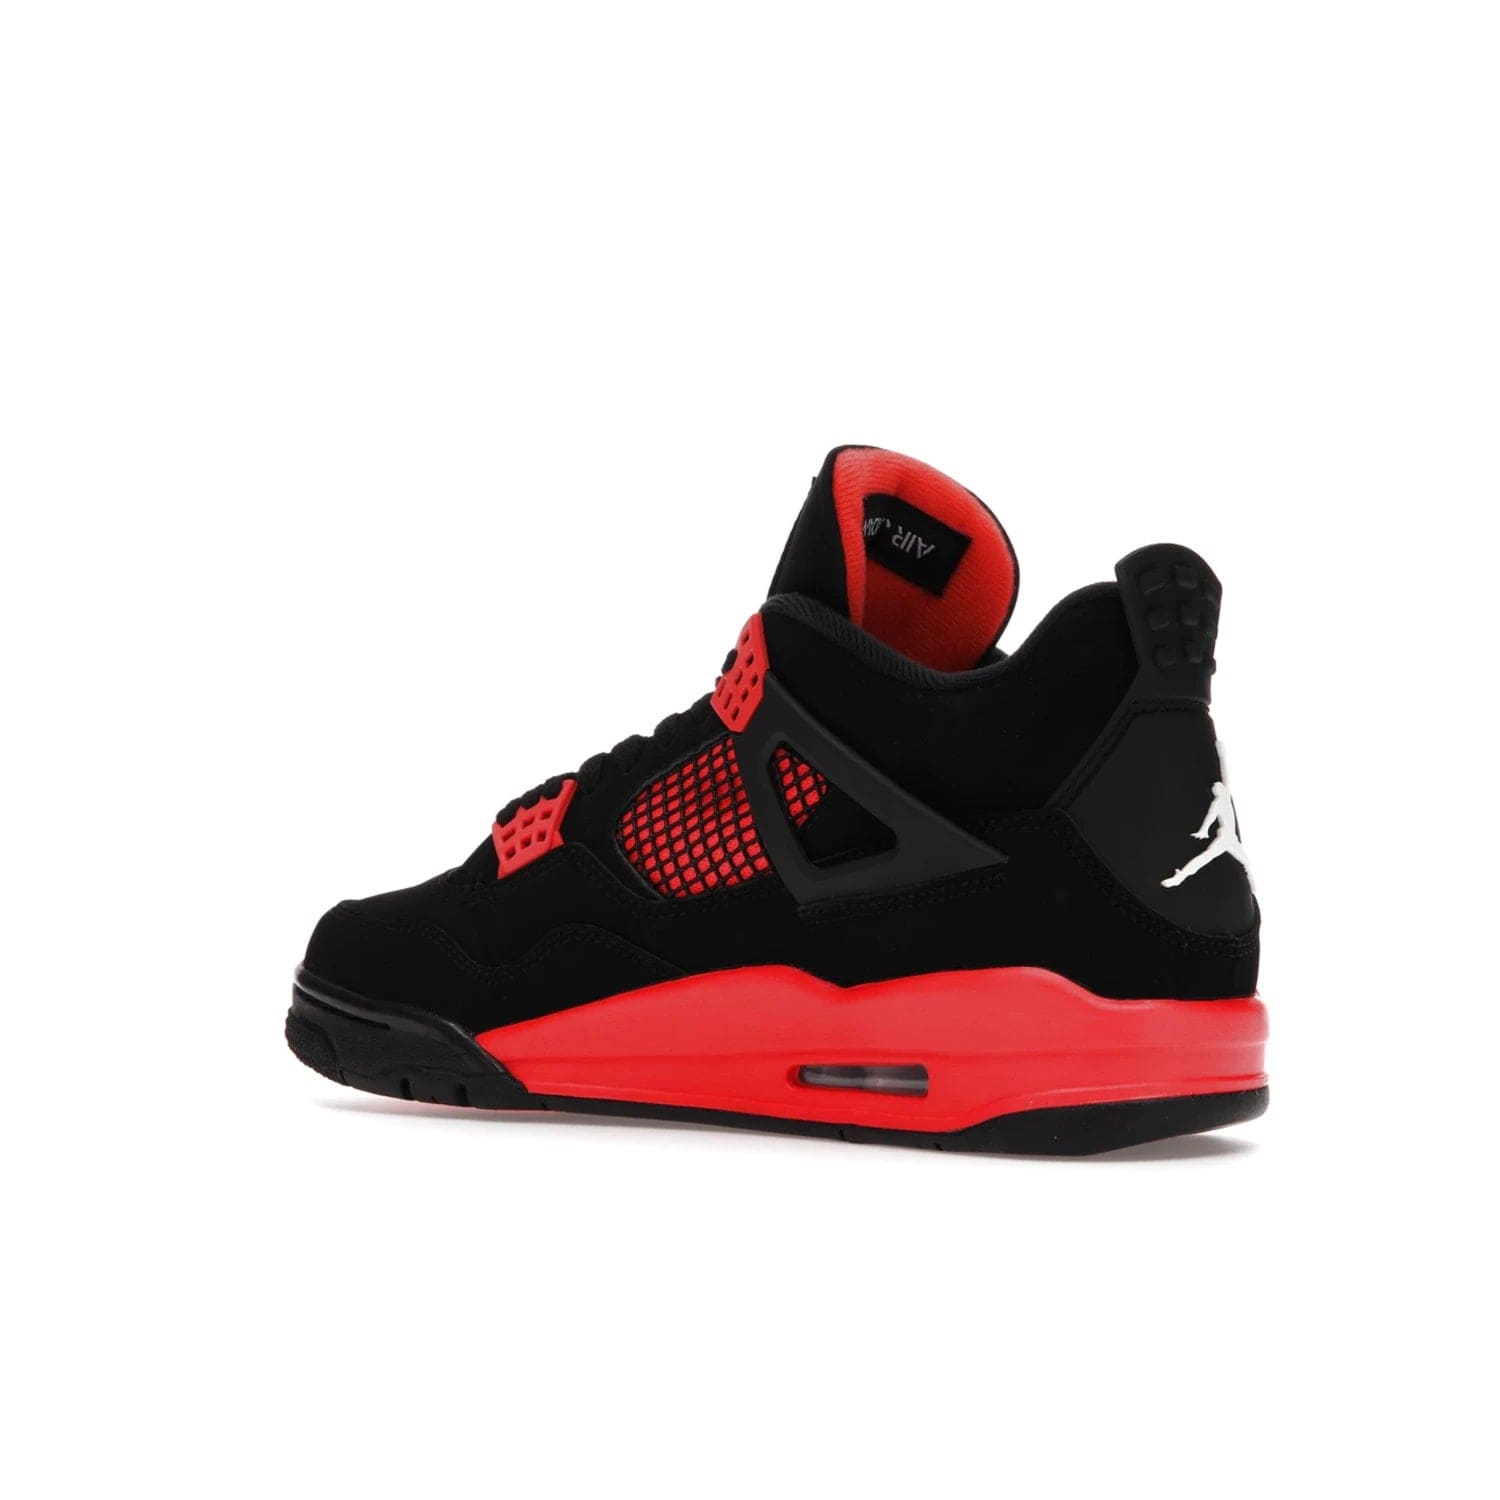 Jordan 4 Retro Red Thunder - Image 23 - Only at www.BallersClubKickz.com - Upscale your footwear with the Air Jordan 4 Retro Red Thunder. Featuring a Durabuck upper, red underlays, signature Flight patch, and vibrant red midsole, this retro sneaker adds style and edge. Releases in January 2022.